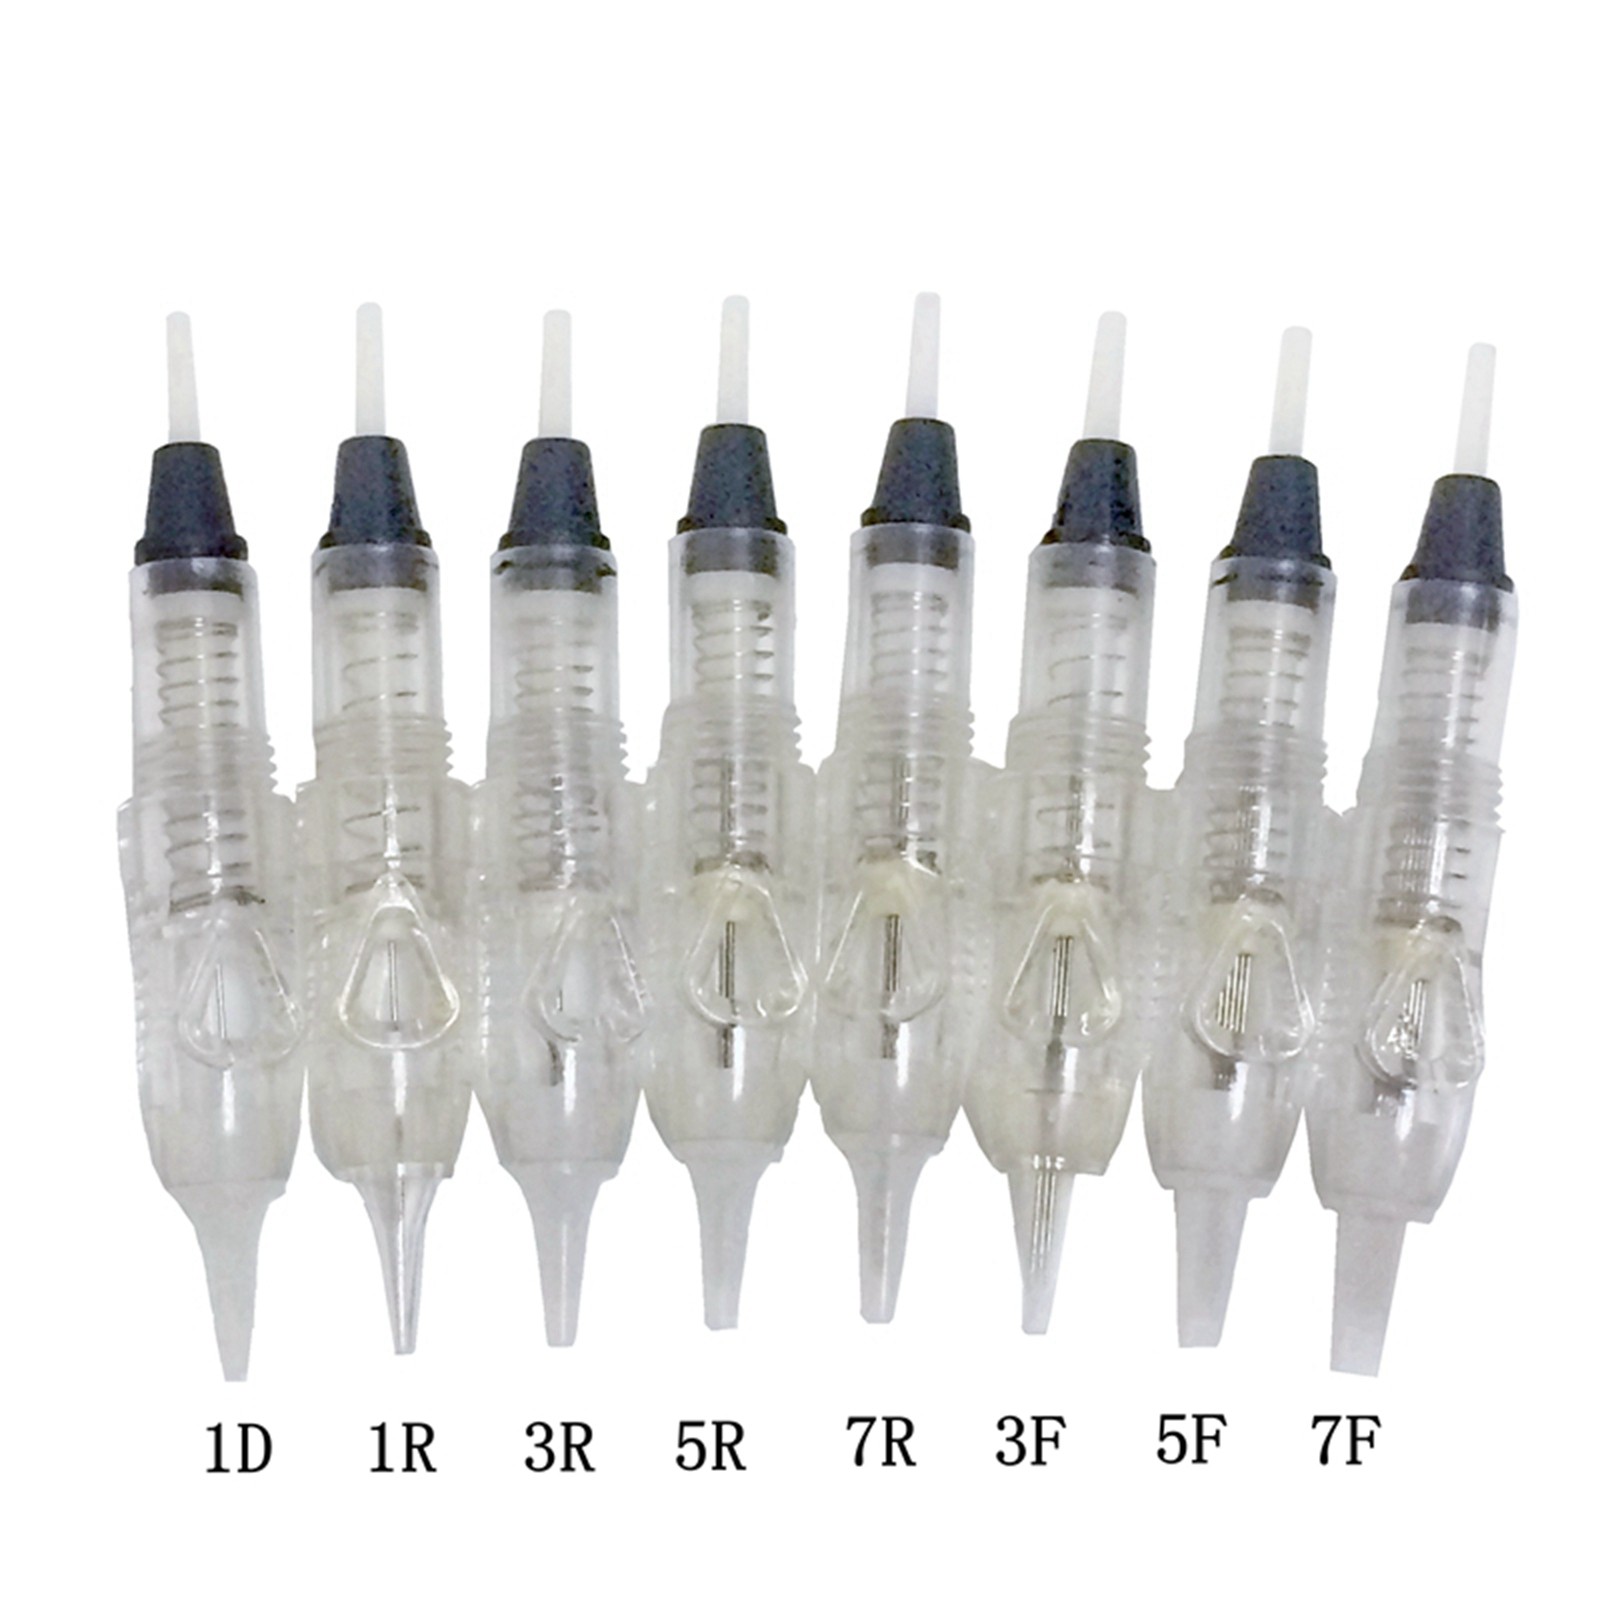 BoLin-Find Semi Disposable Tattoo Needle Cartridges From Bolin Cosmetic-1